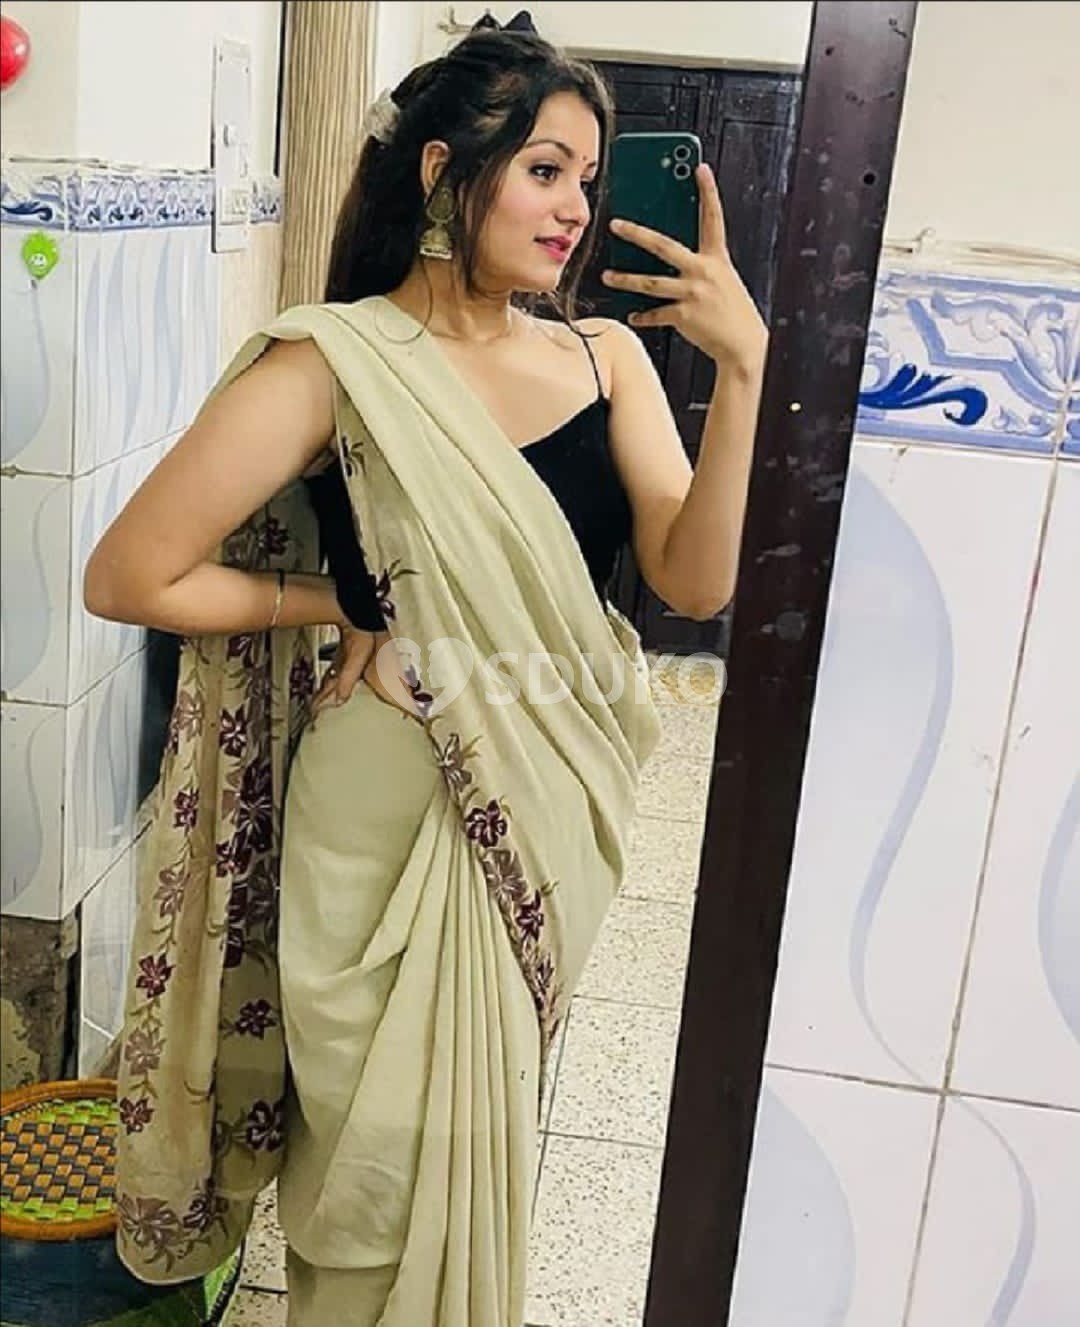 Hadapsar Full satisfied independent call Girl 24 hours availablen. I